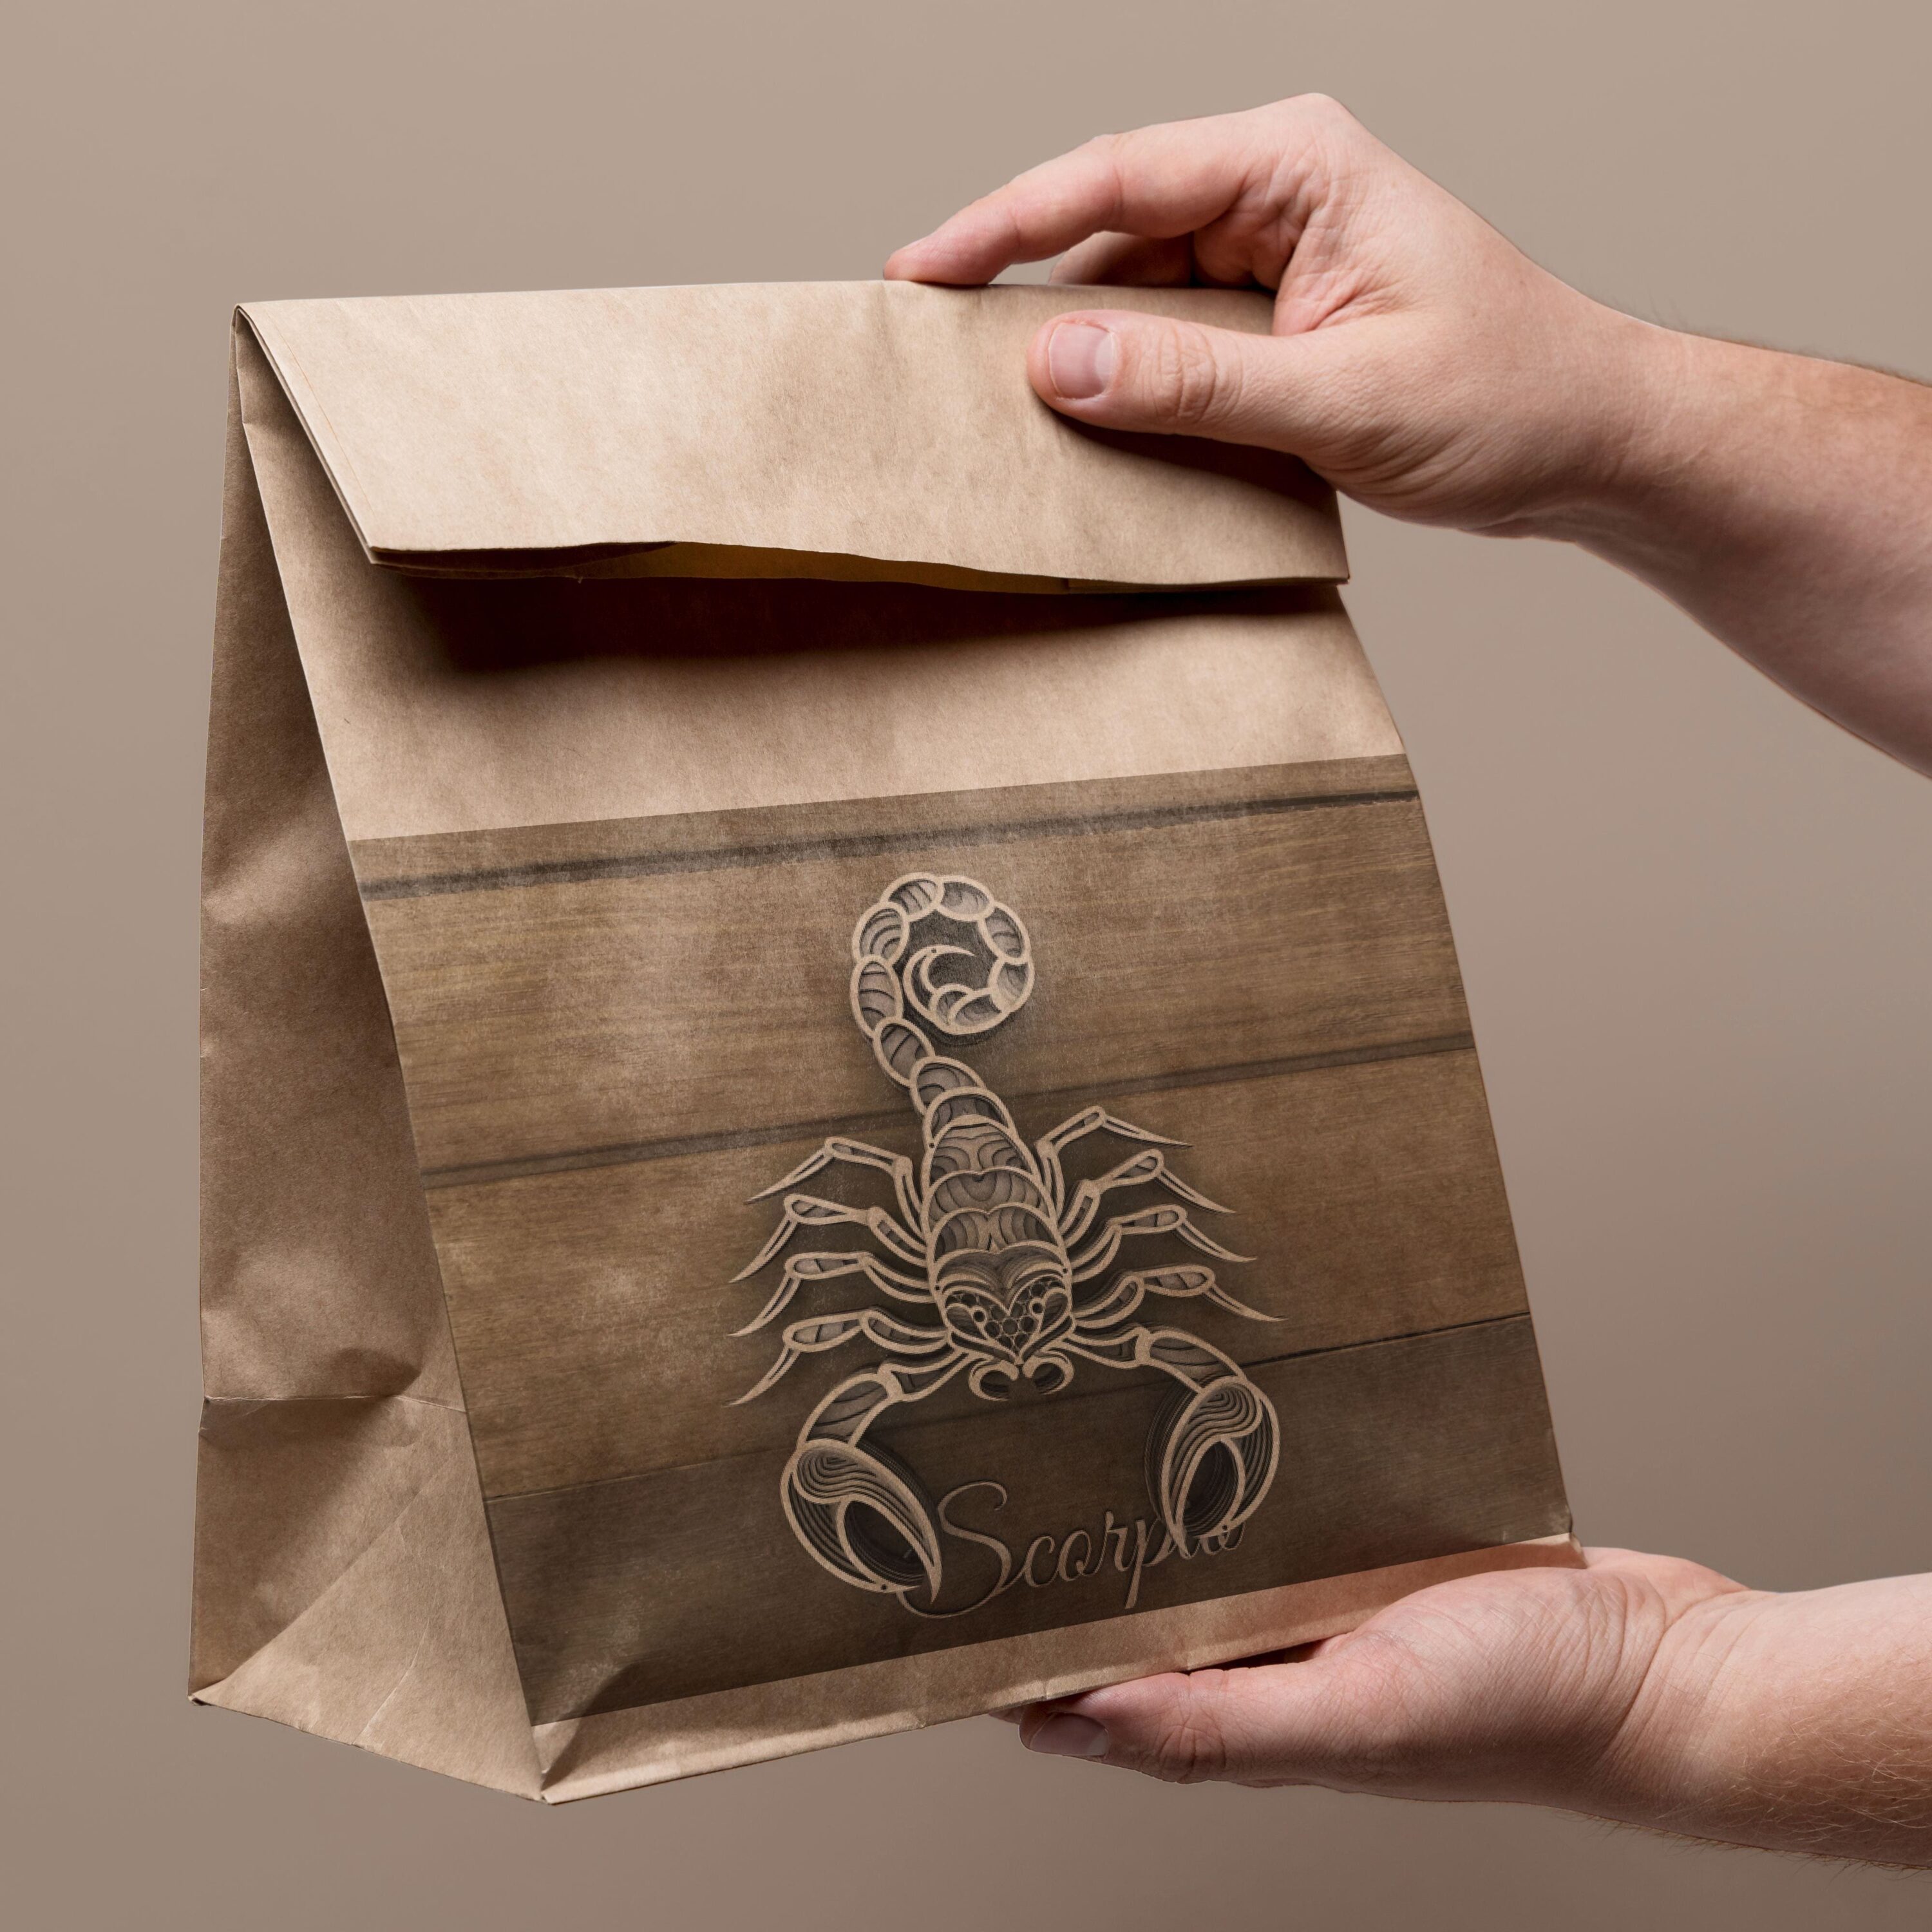 Person holding a brown paper bag with a scorpion on it.